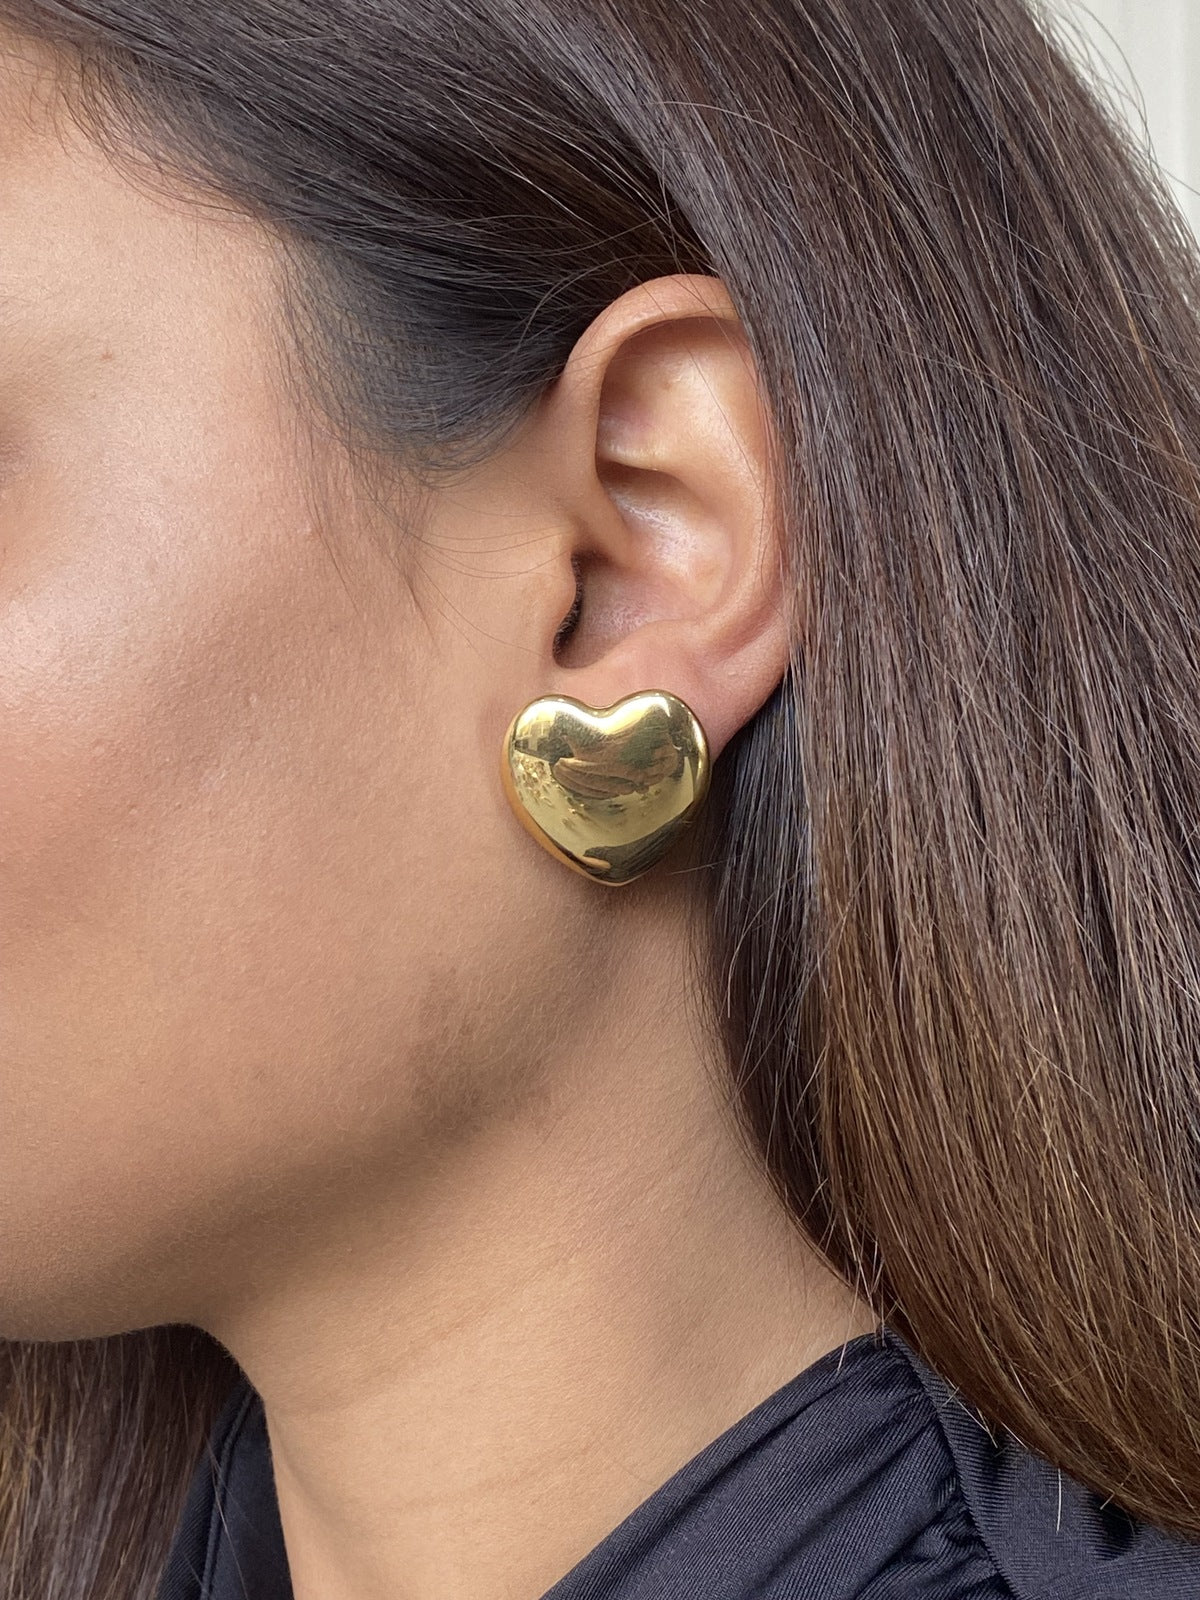 Amama,Alexie Studs In Gold